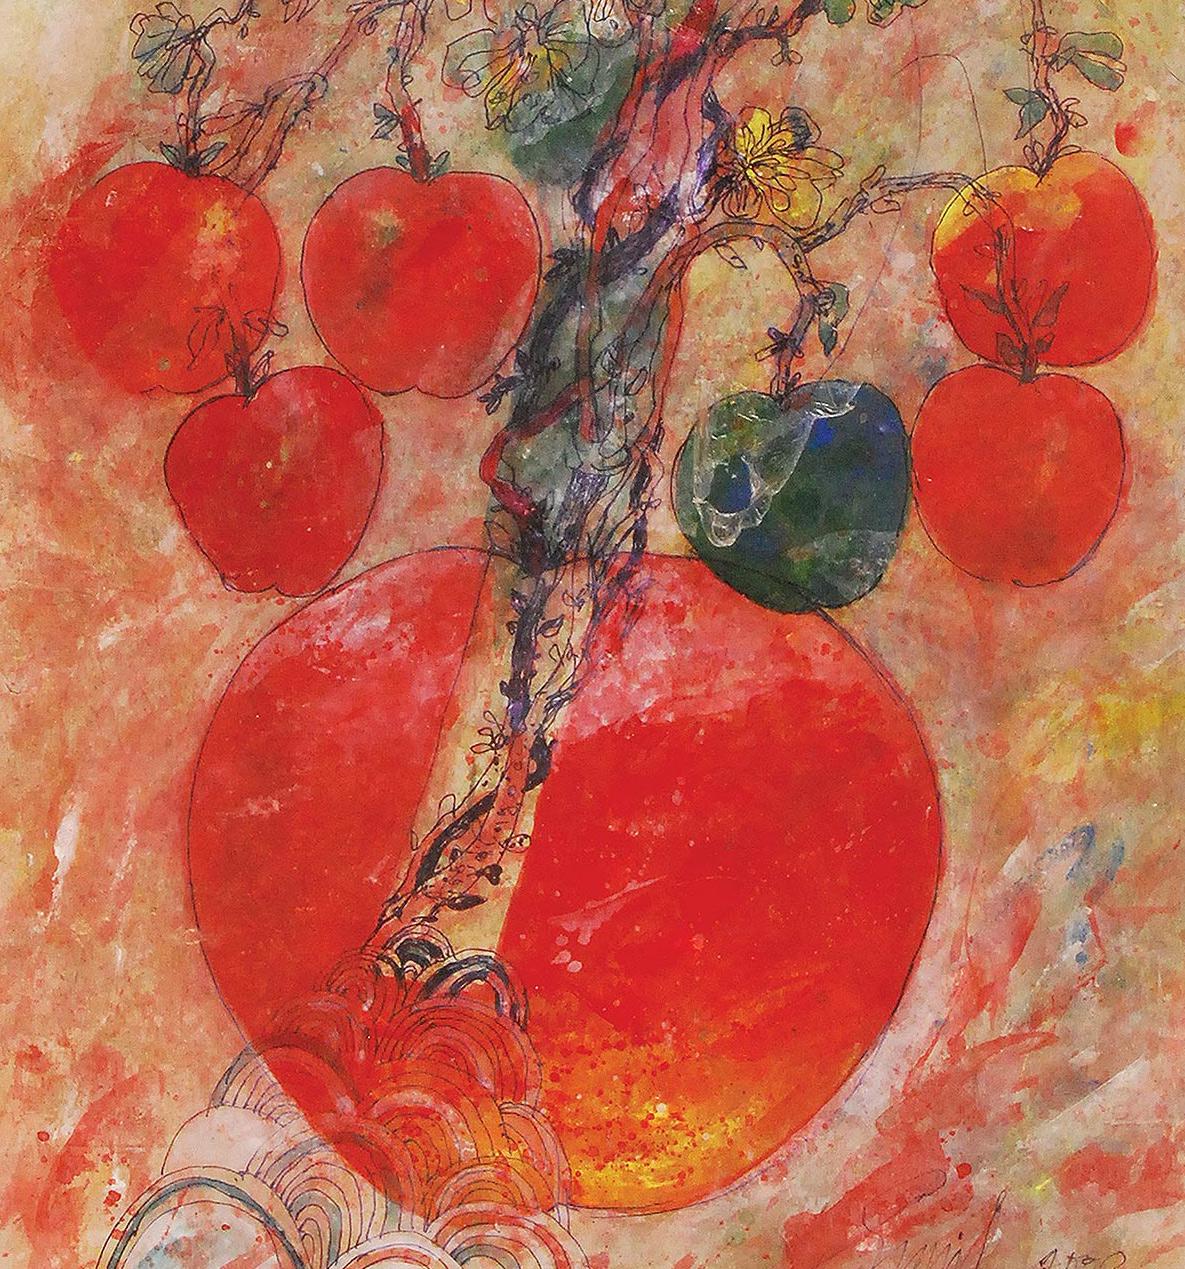 Apples, Mixed Media on Paper, Red, Green, Blue, Yellow by Indian Artist